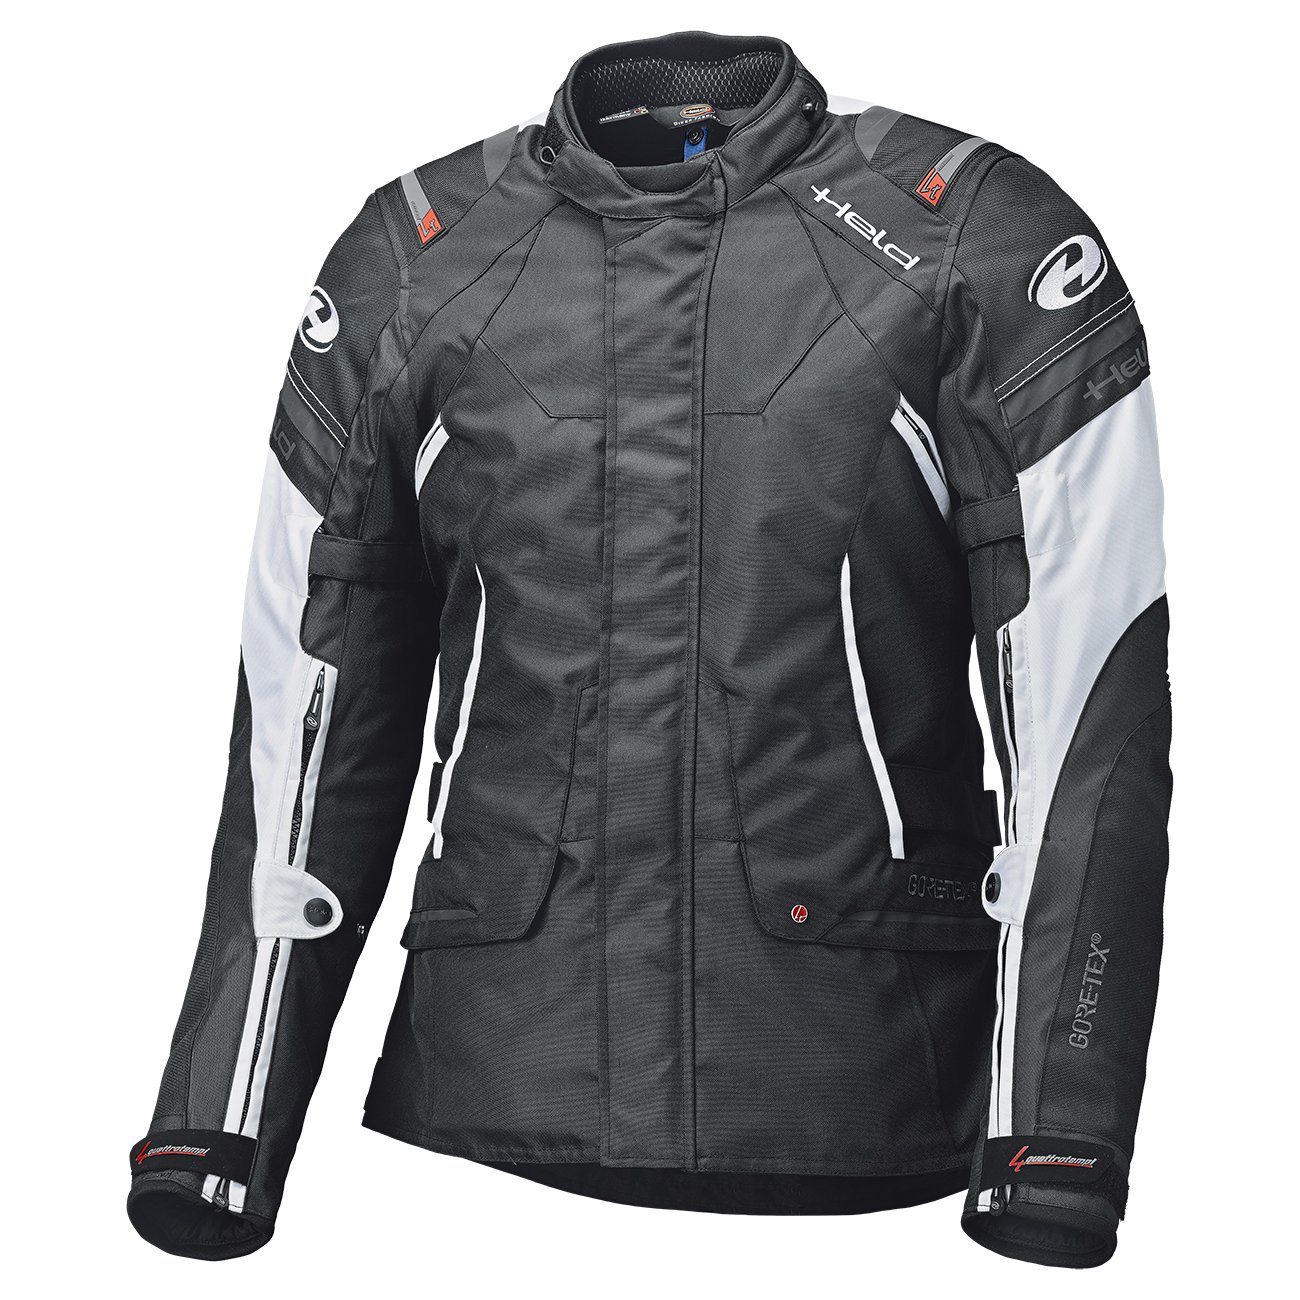 Image of Held Molto GTX Jacket Black White Size M ID 4049462820838